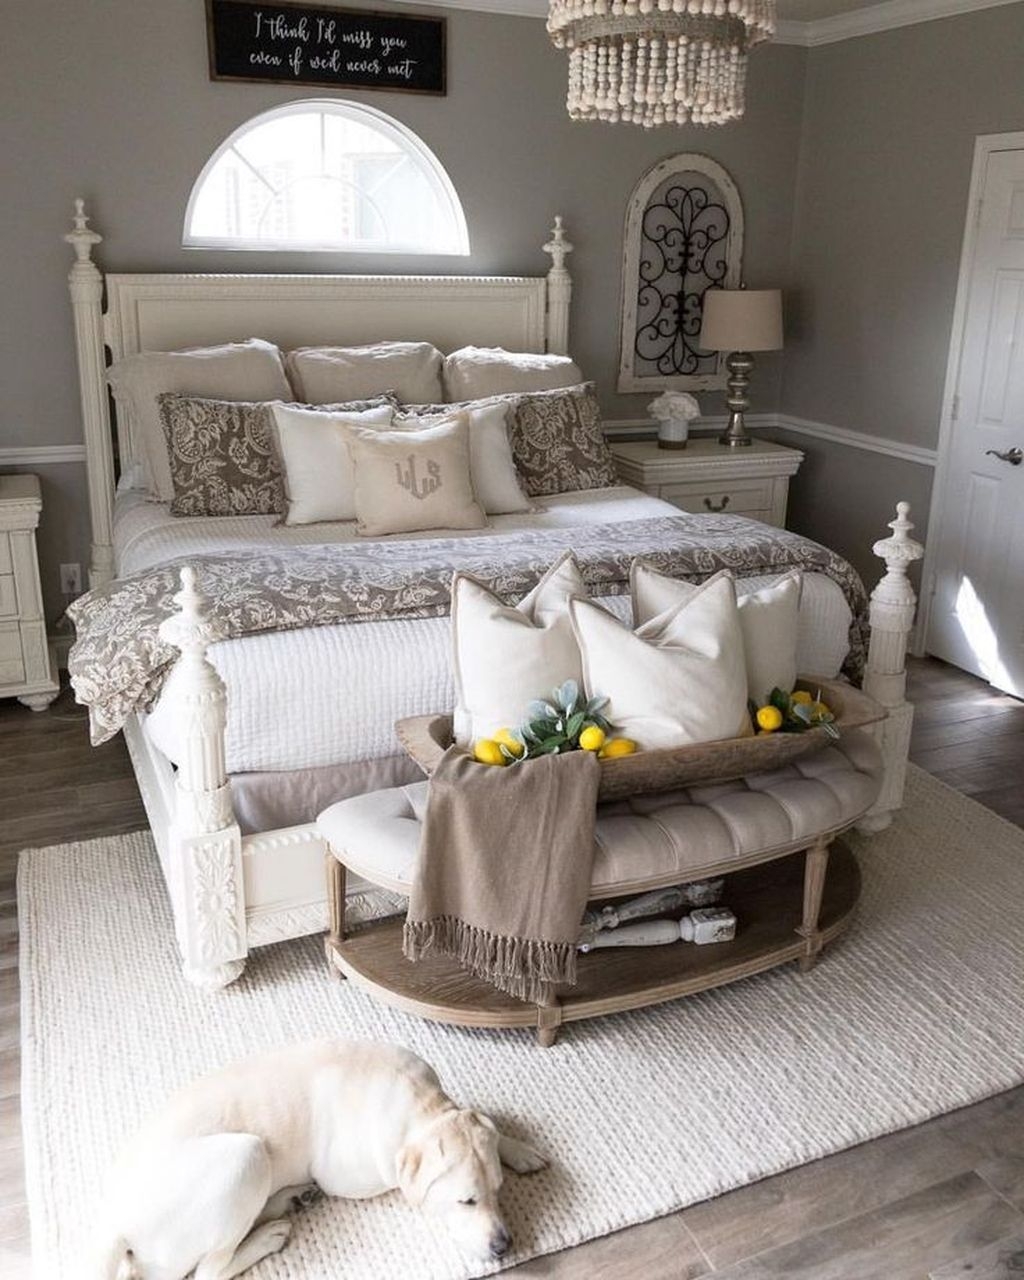 Gorgeous Farmhouse Bedroom Remodel Ideas On A Budget 48